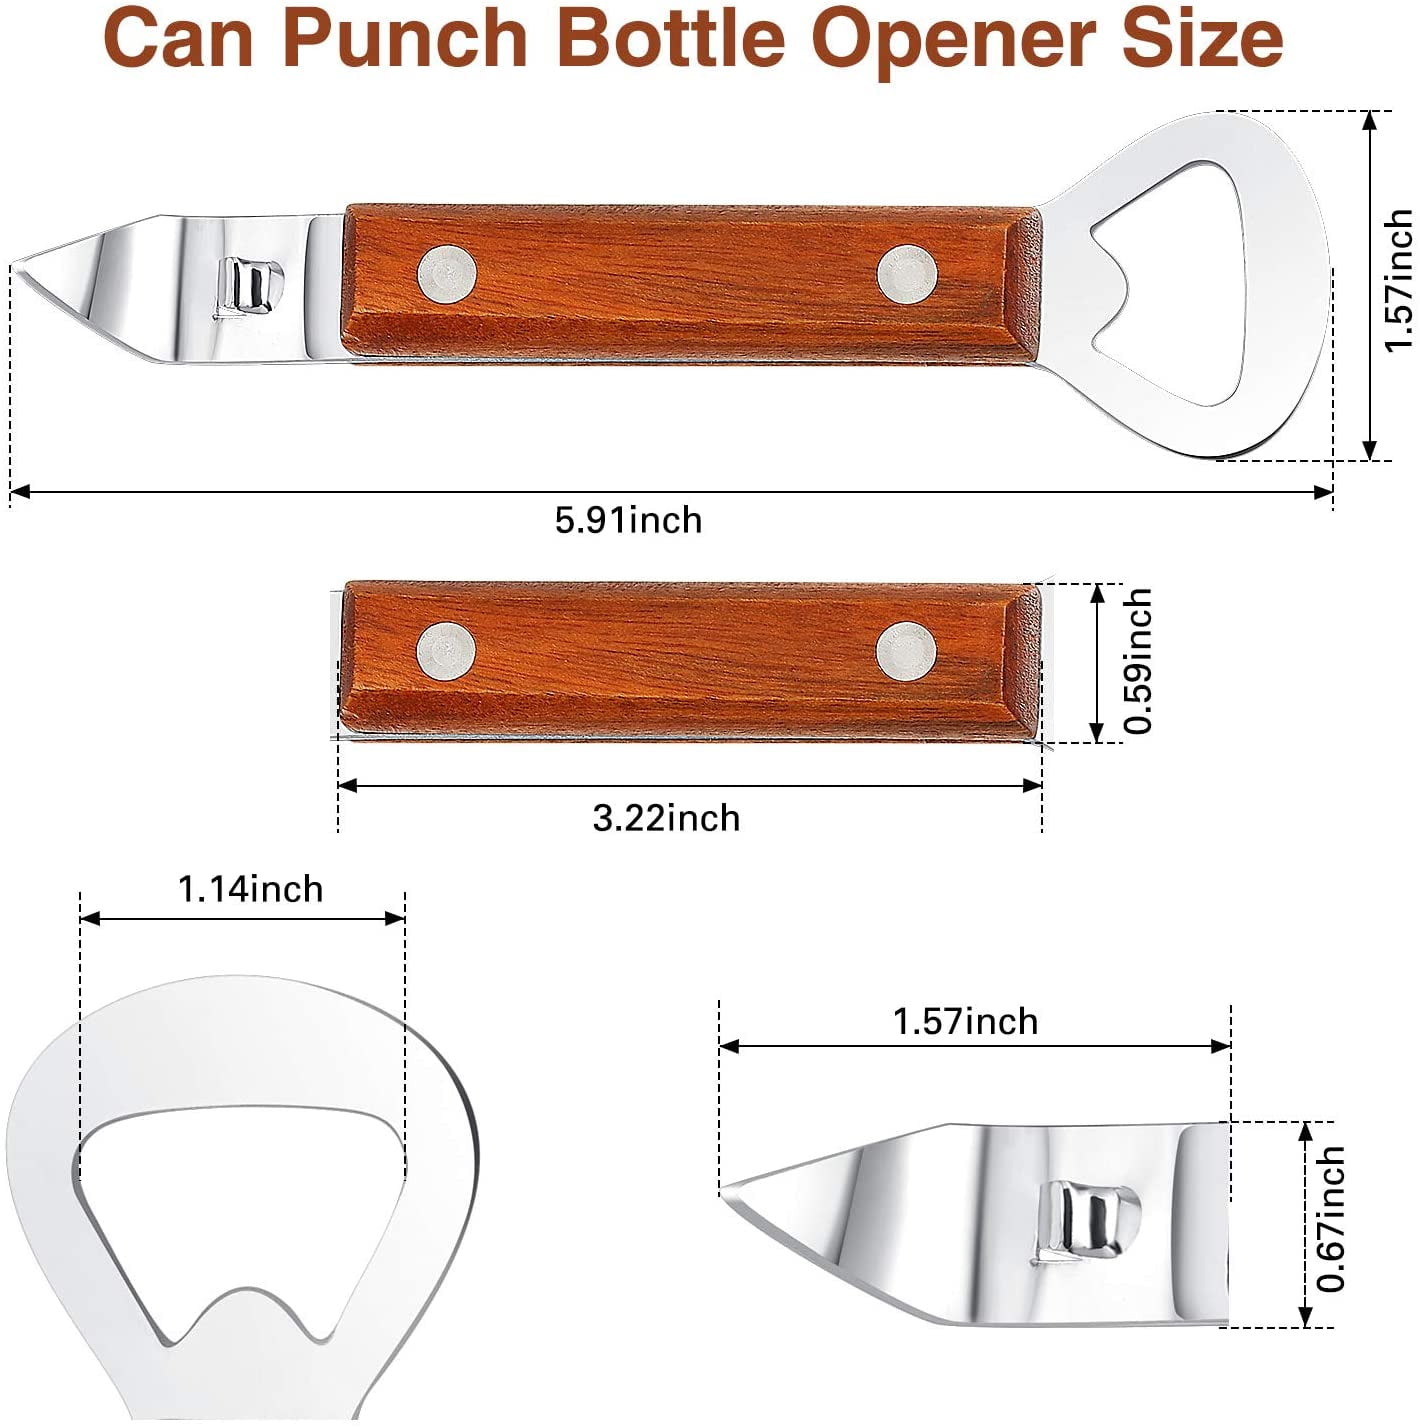 Bottle Punch Can Opener Stainless Steel Beer Bottle Opener Punch Bottle  Opener with Wood Handle for Manual Bottles Cans (2, Wood Color)